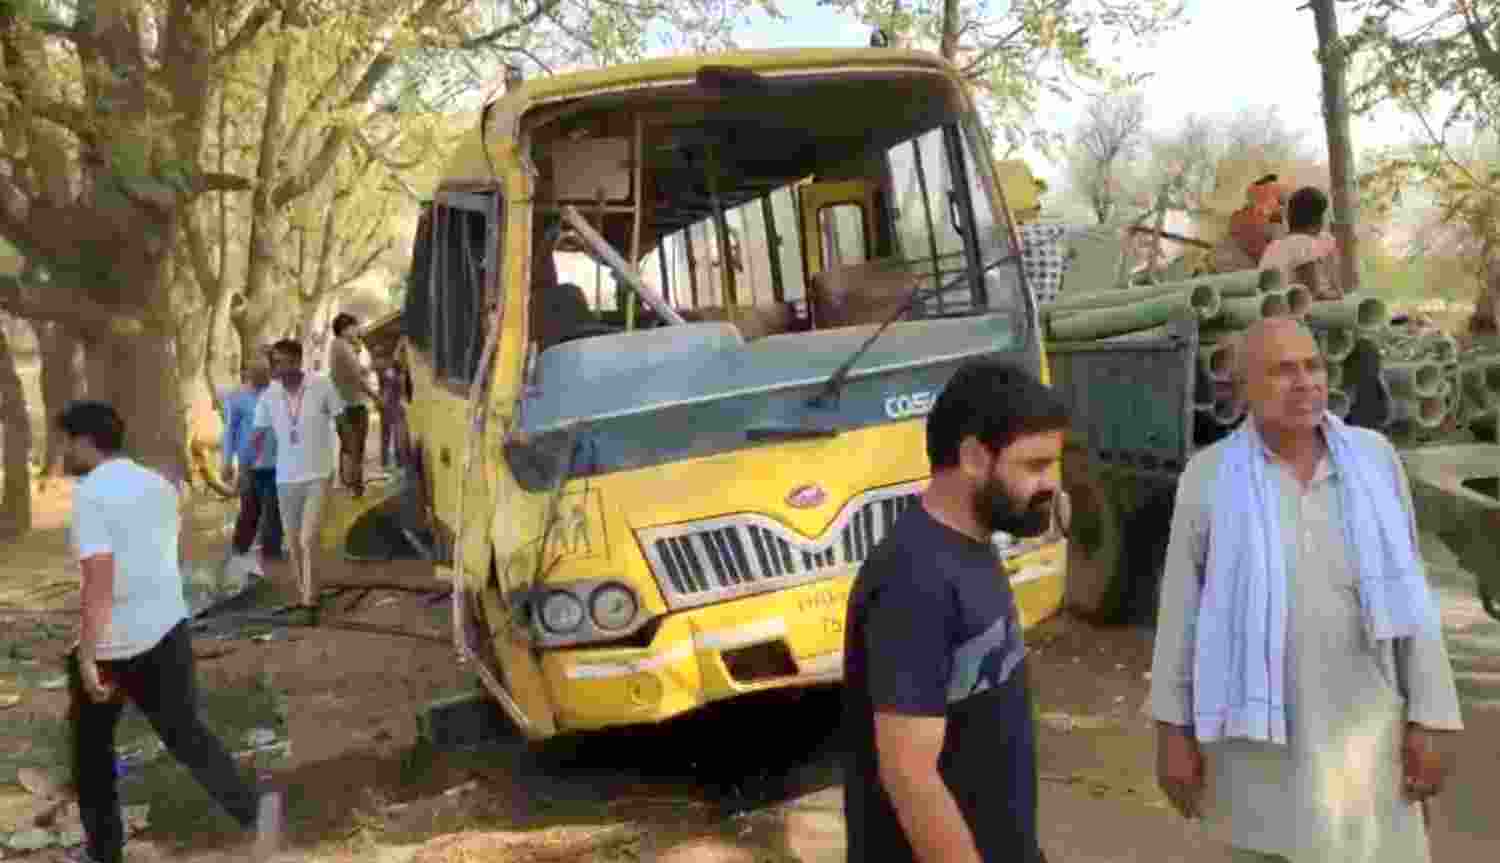 'Why was the school open on Eid?': Fatal bus accident in Haryana raises questions